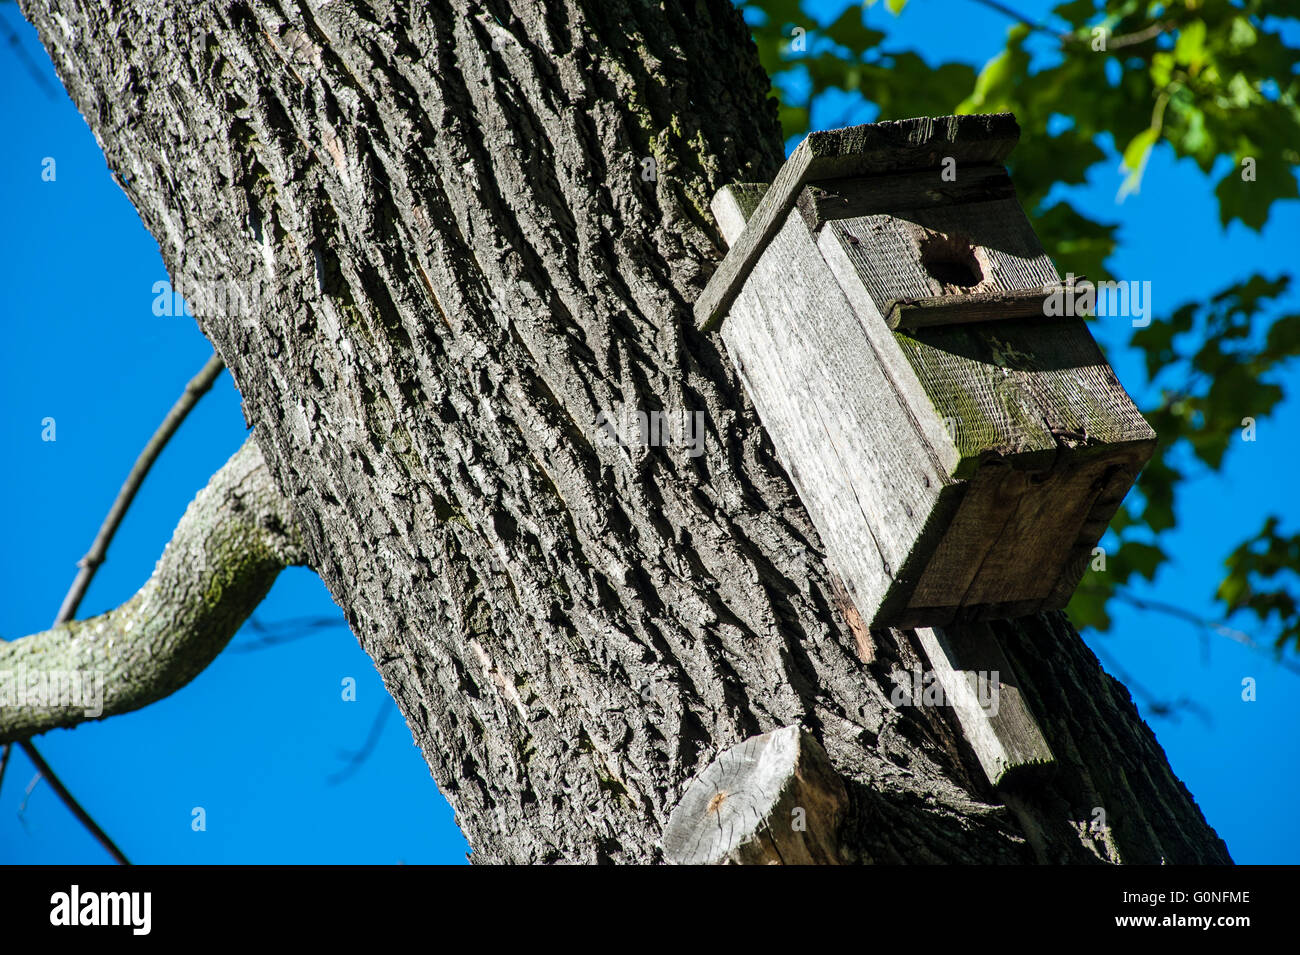 A nesting box for birds in a park in Warsaw, Poland. Stock Photo